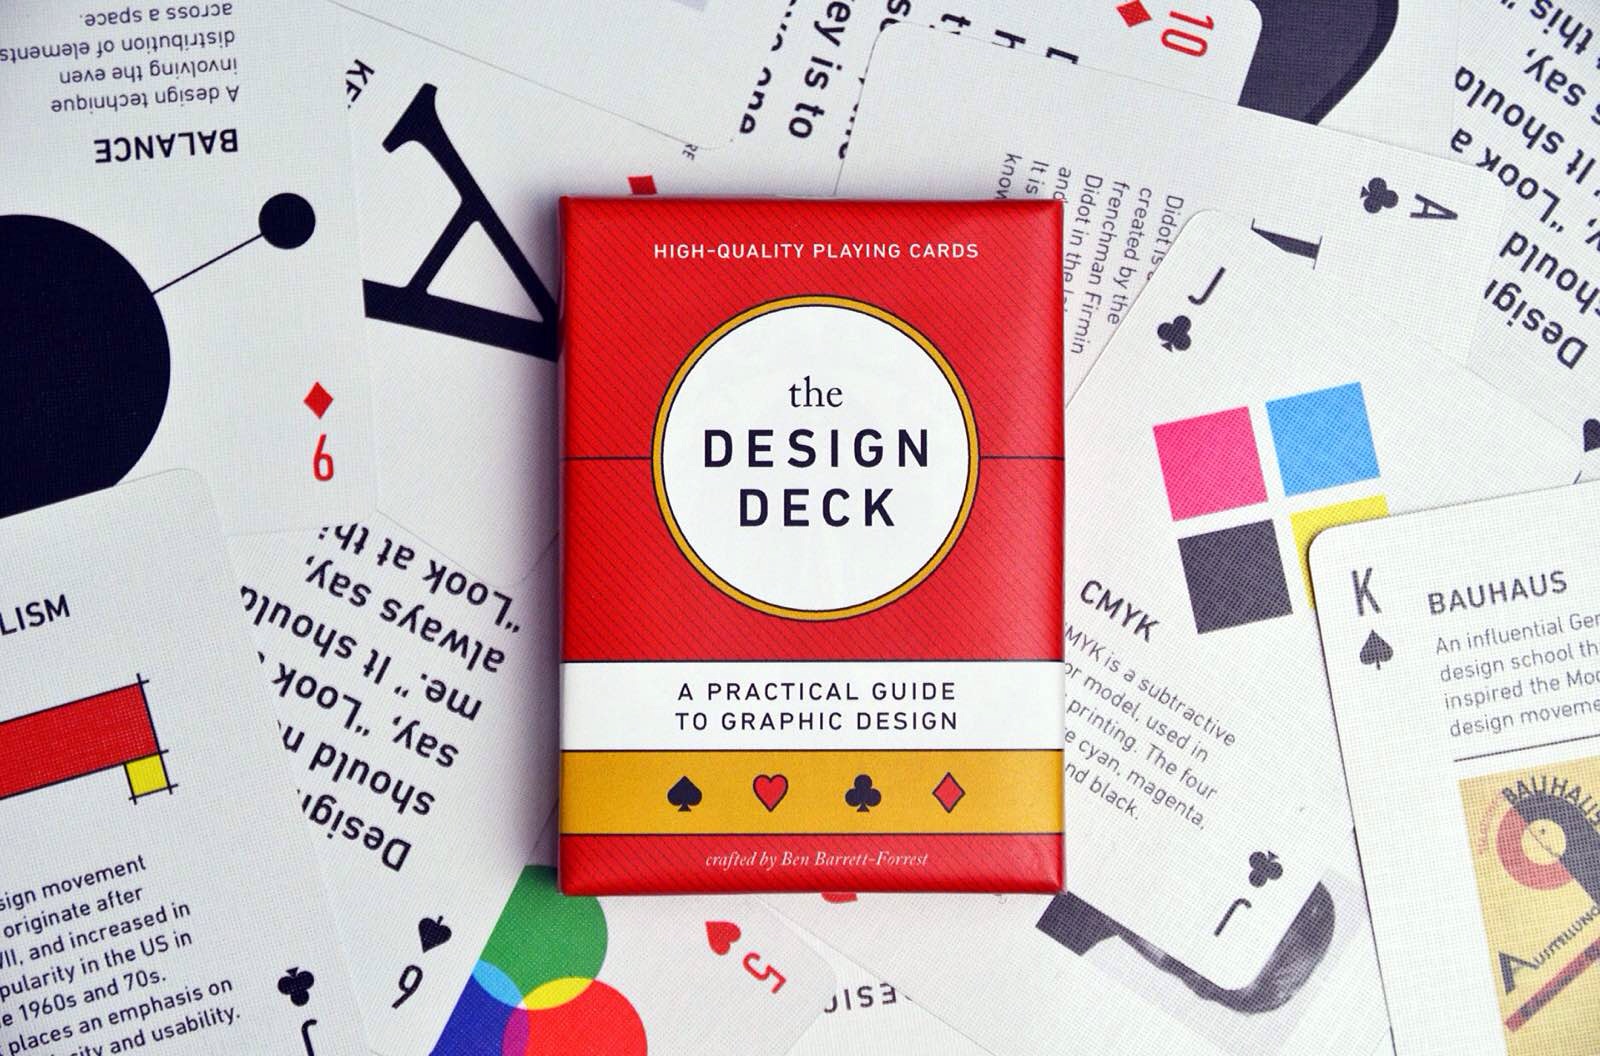 The Design Deck by Forrest Goods. (Normally $20, currently $17)